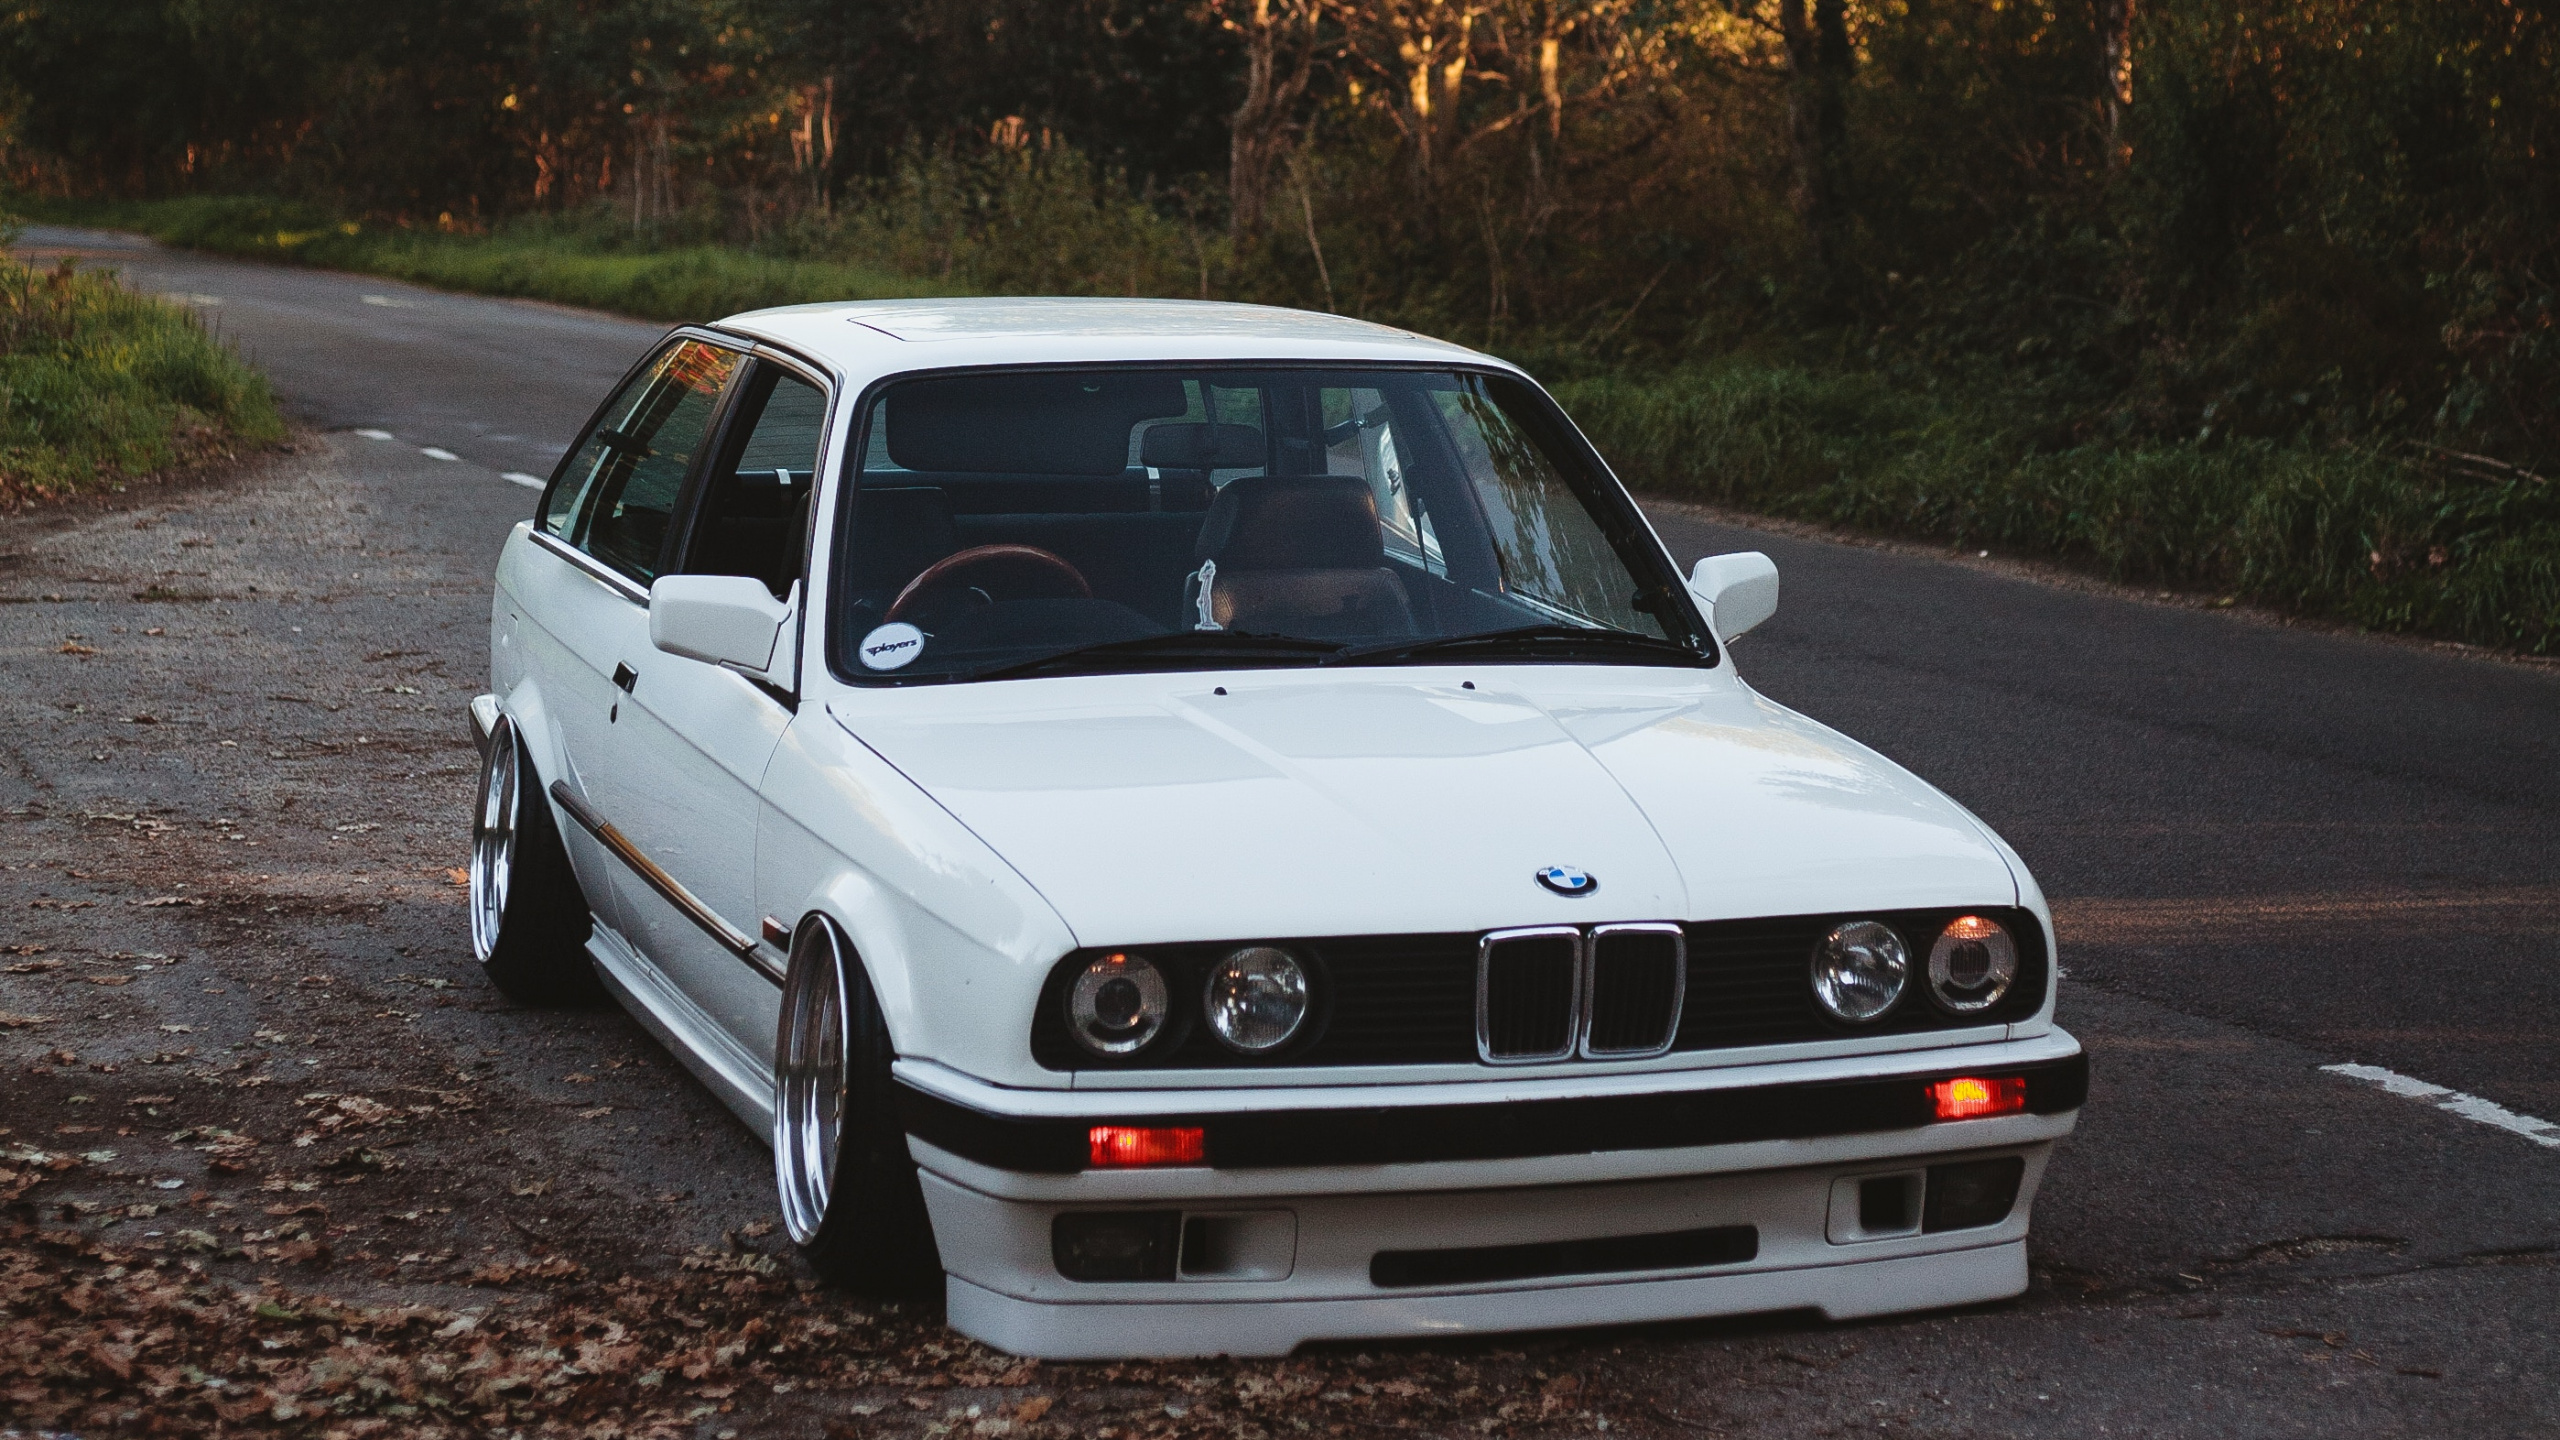 White Bmw m 3 on Road During Daytime. Wallpaper in 2560x1440 Resolution